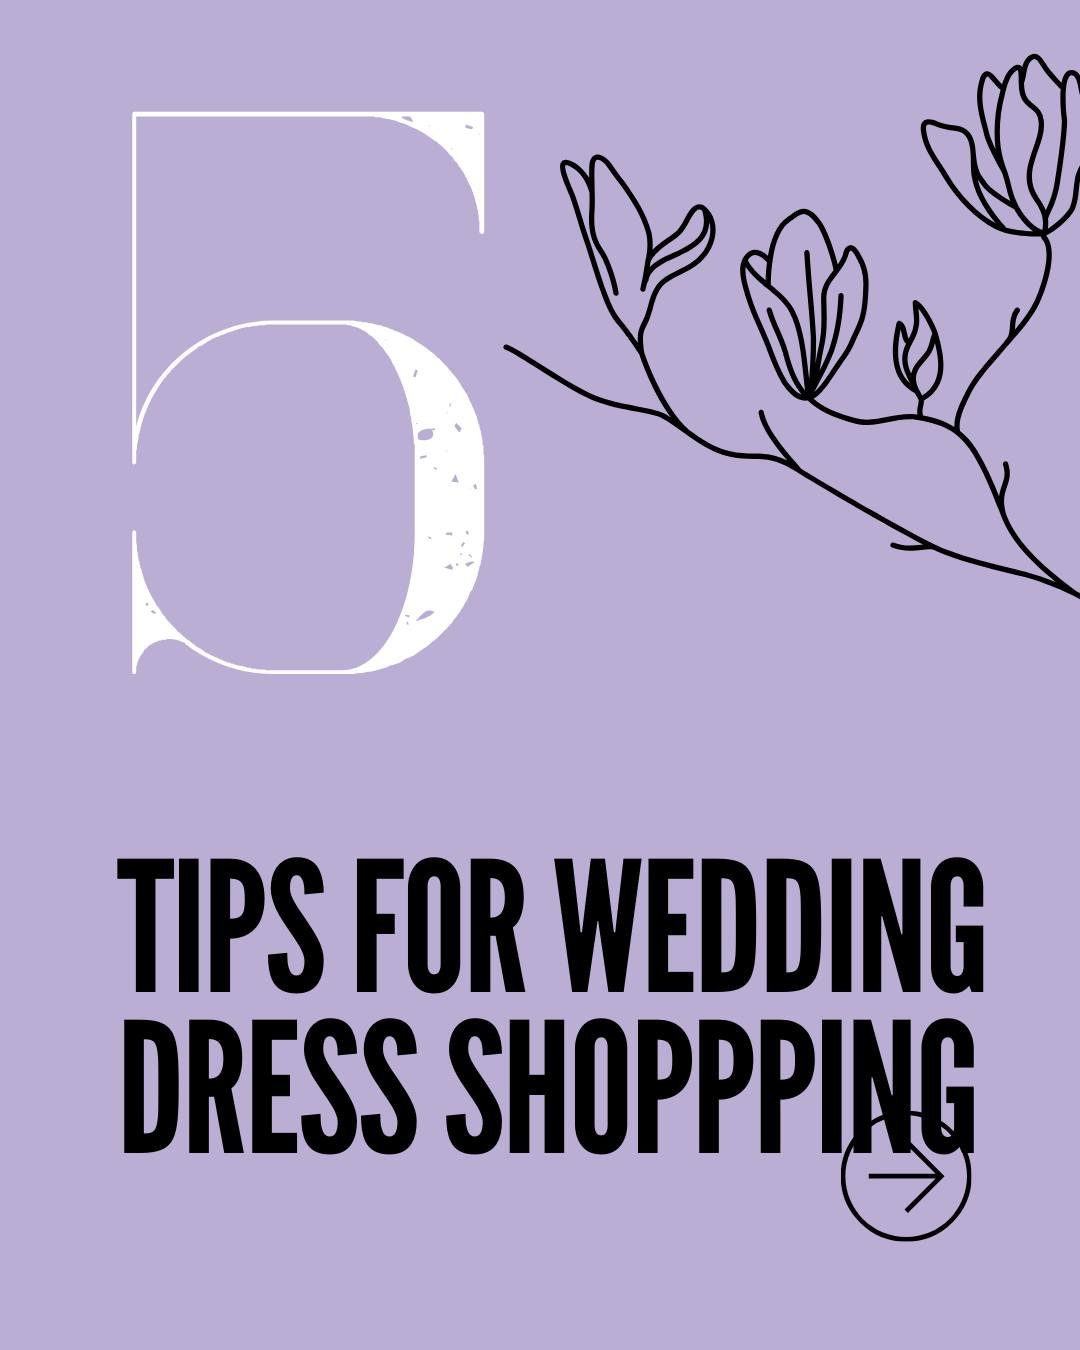 Bridal shopping is the one of the most exciting times of your life, but it can become challenging. Follow these 5 tips  for having the best time! 

1.  Don't listen to too many opinions. Far too often we see gorgeous brides being swayed by others tow